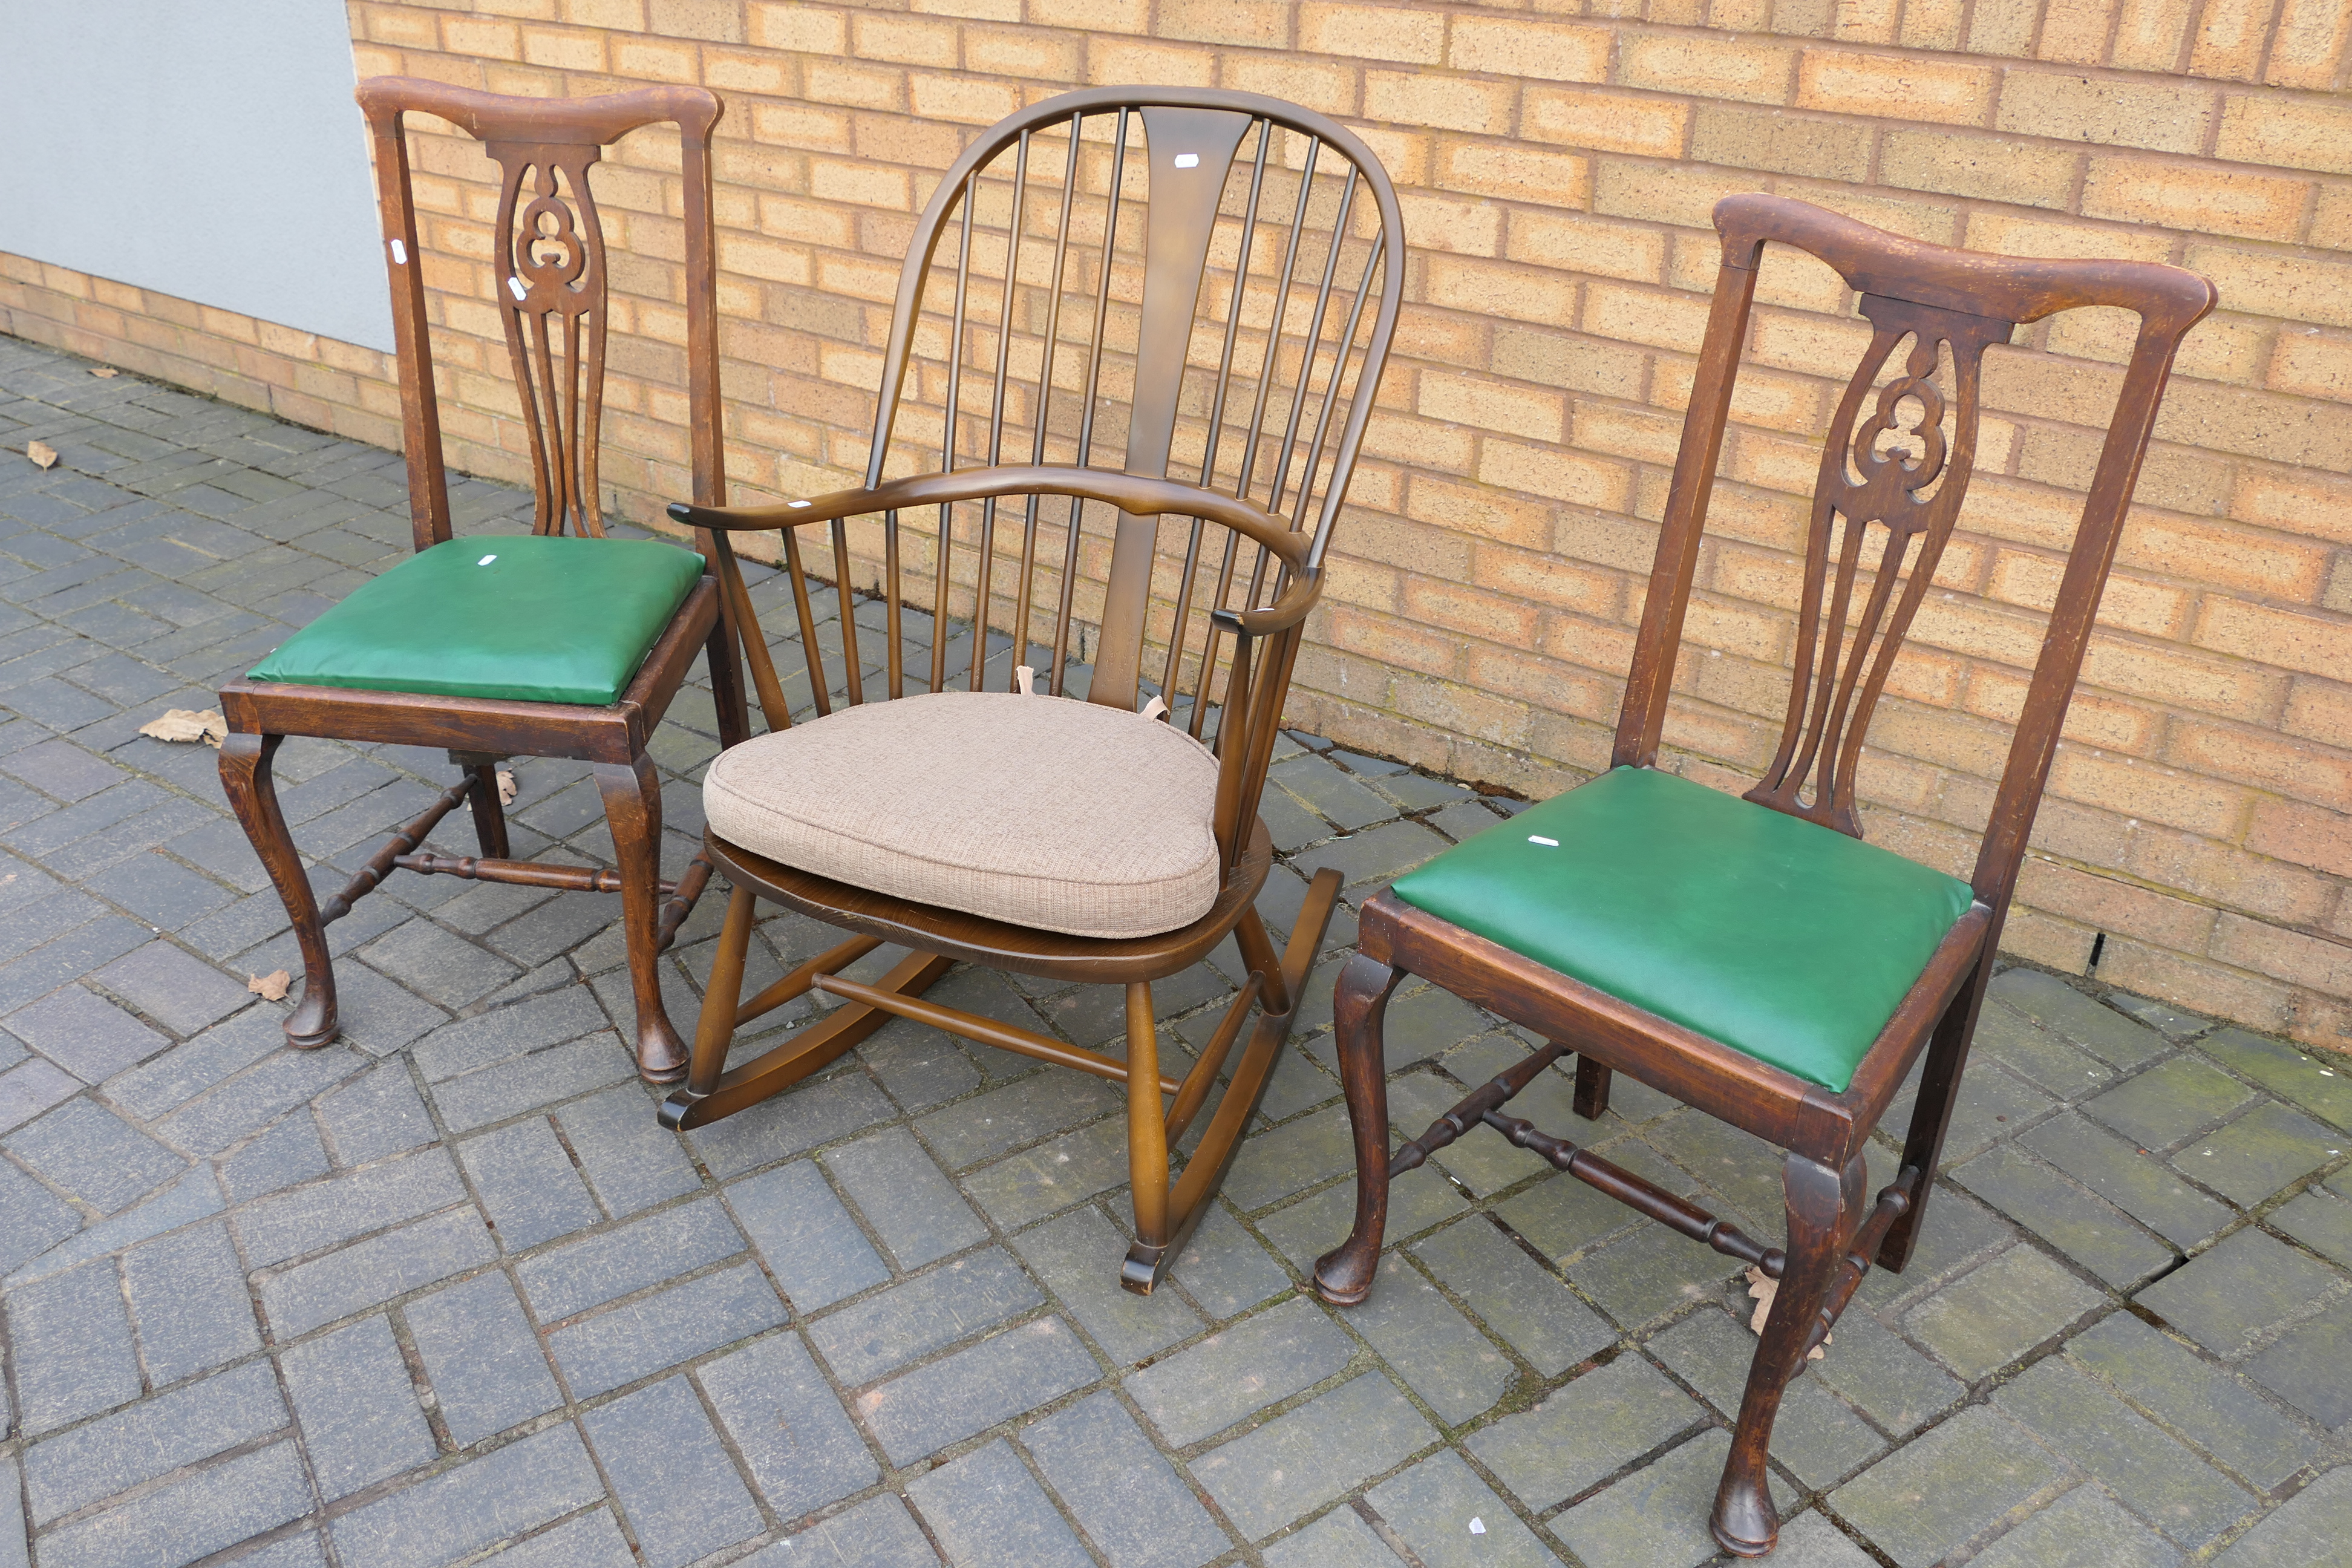 Ercol - An Ercol Chairmakers Windsor rocking chair (gold label) and two dining chairs. - Image 2 of 3